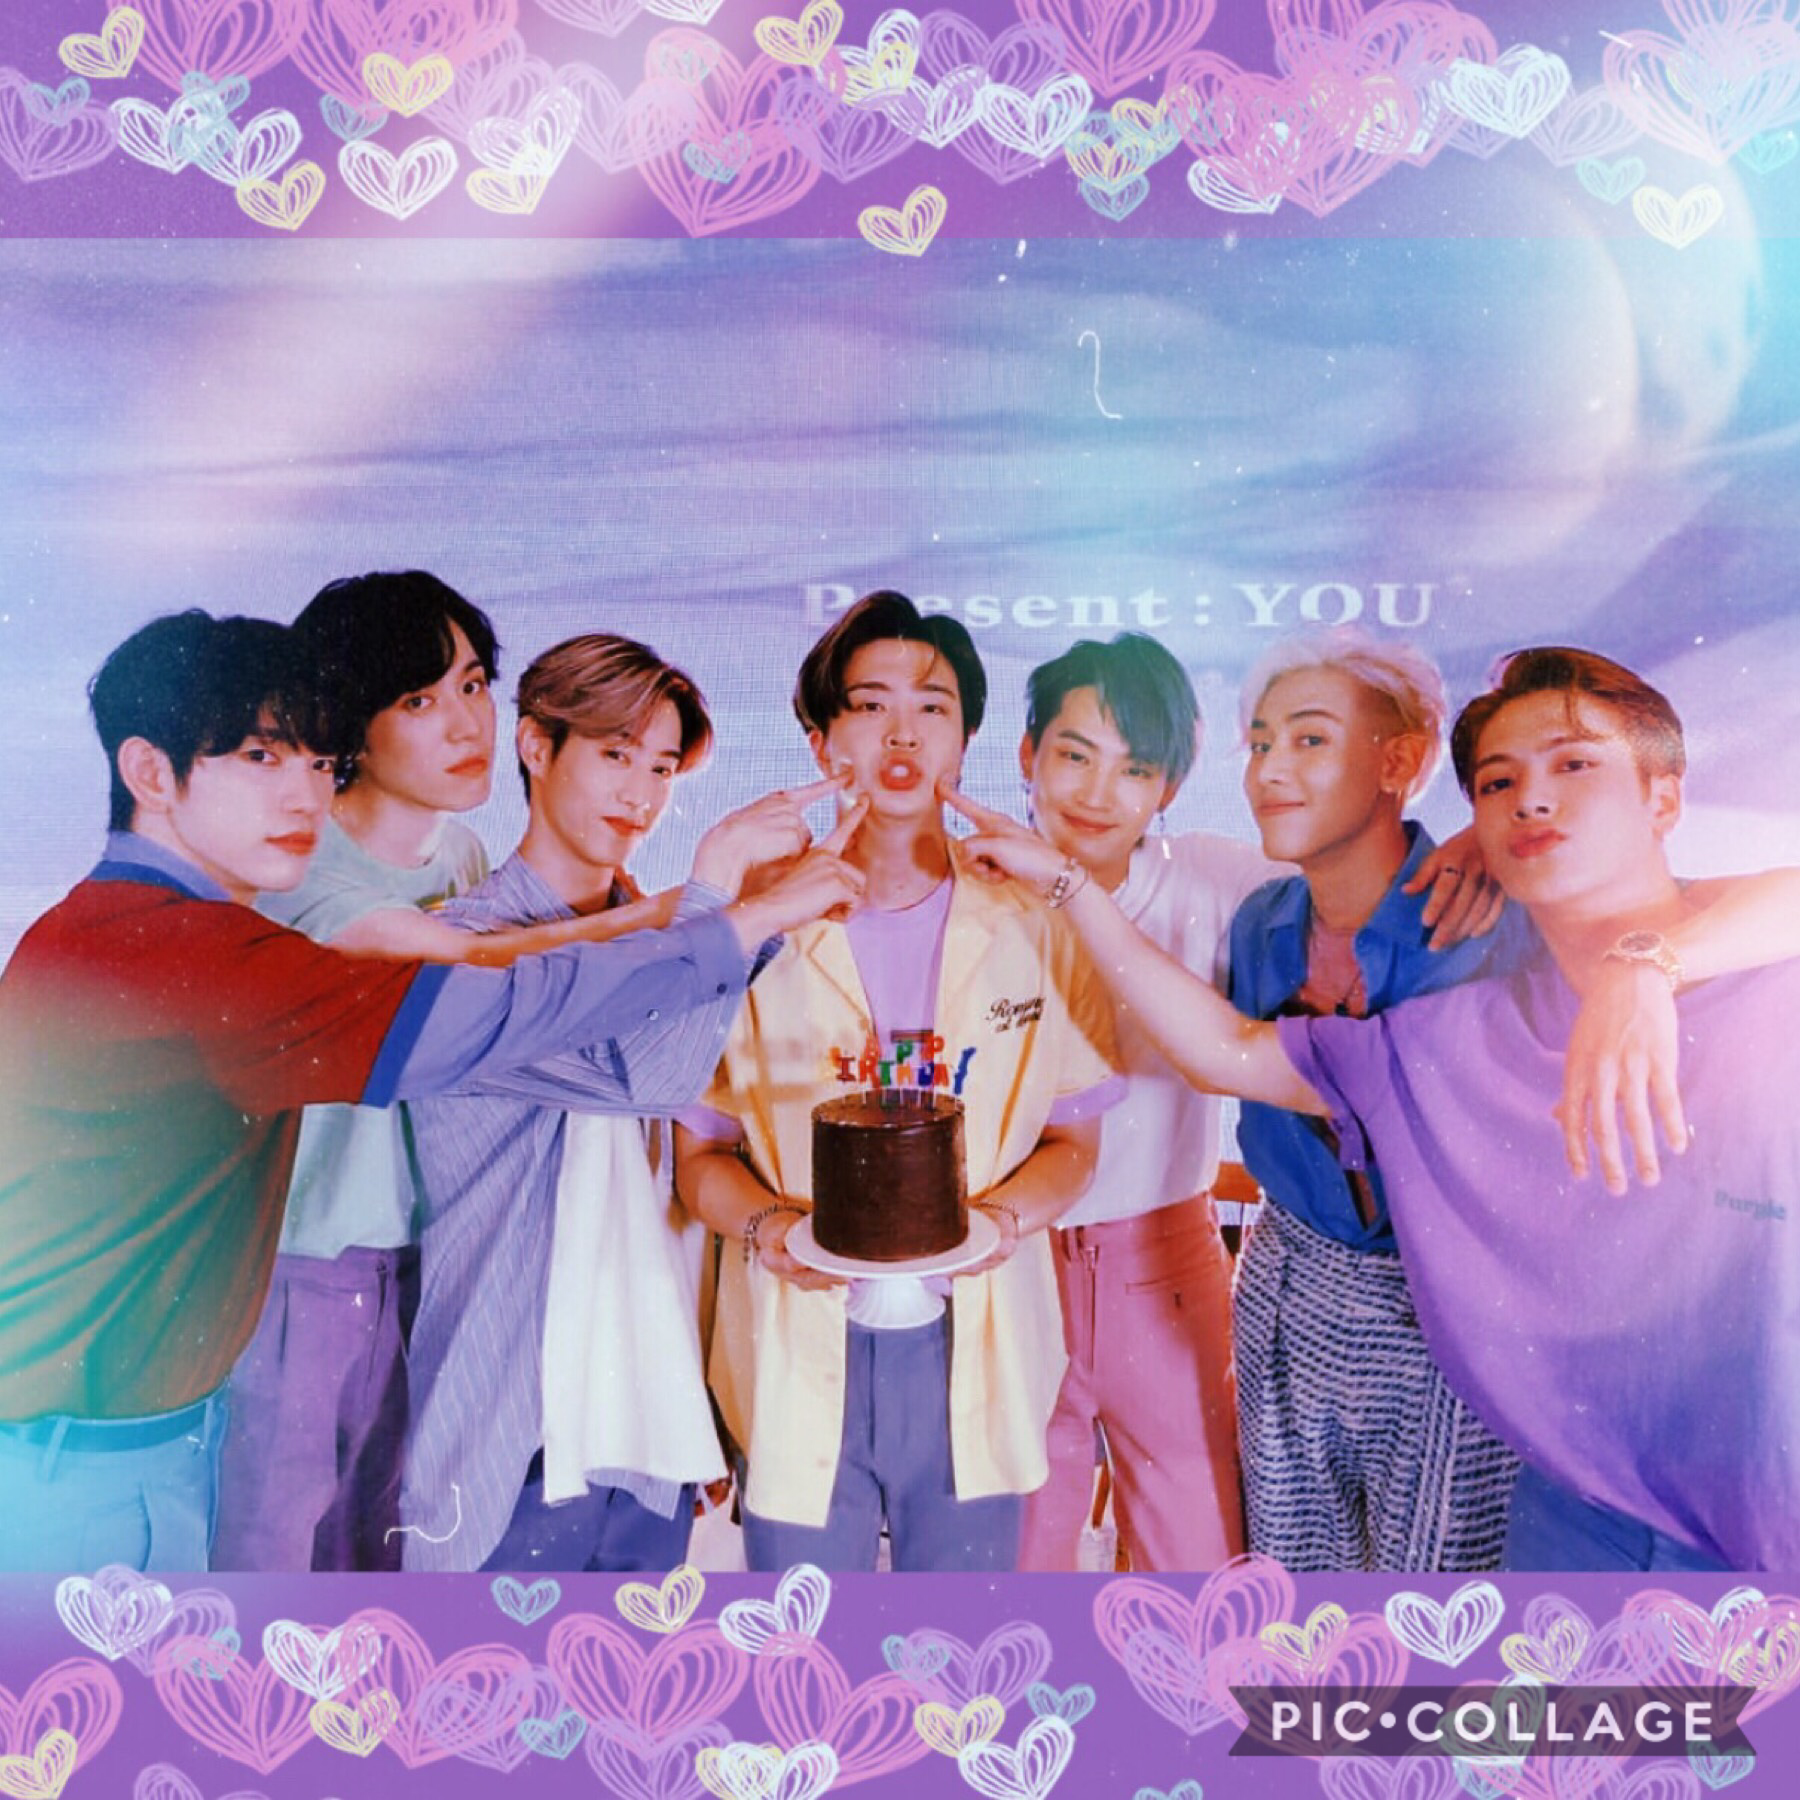 💜update: so when Got7 announced their cb I was literally going crazy and omg I love it, the album, the style, the everything. Yeah I know it was two weeks ago but they still deserve all my love and they deserve so much💜 